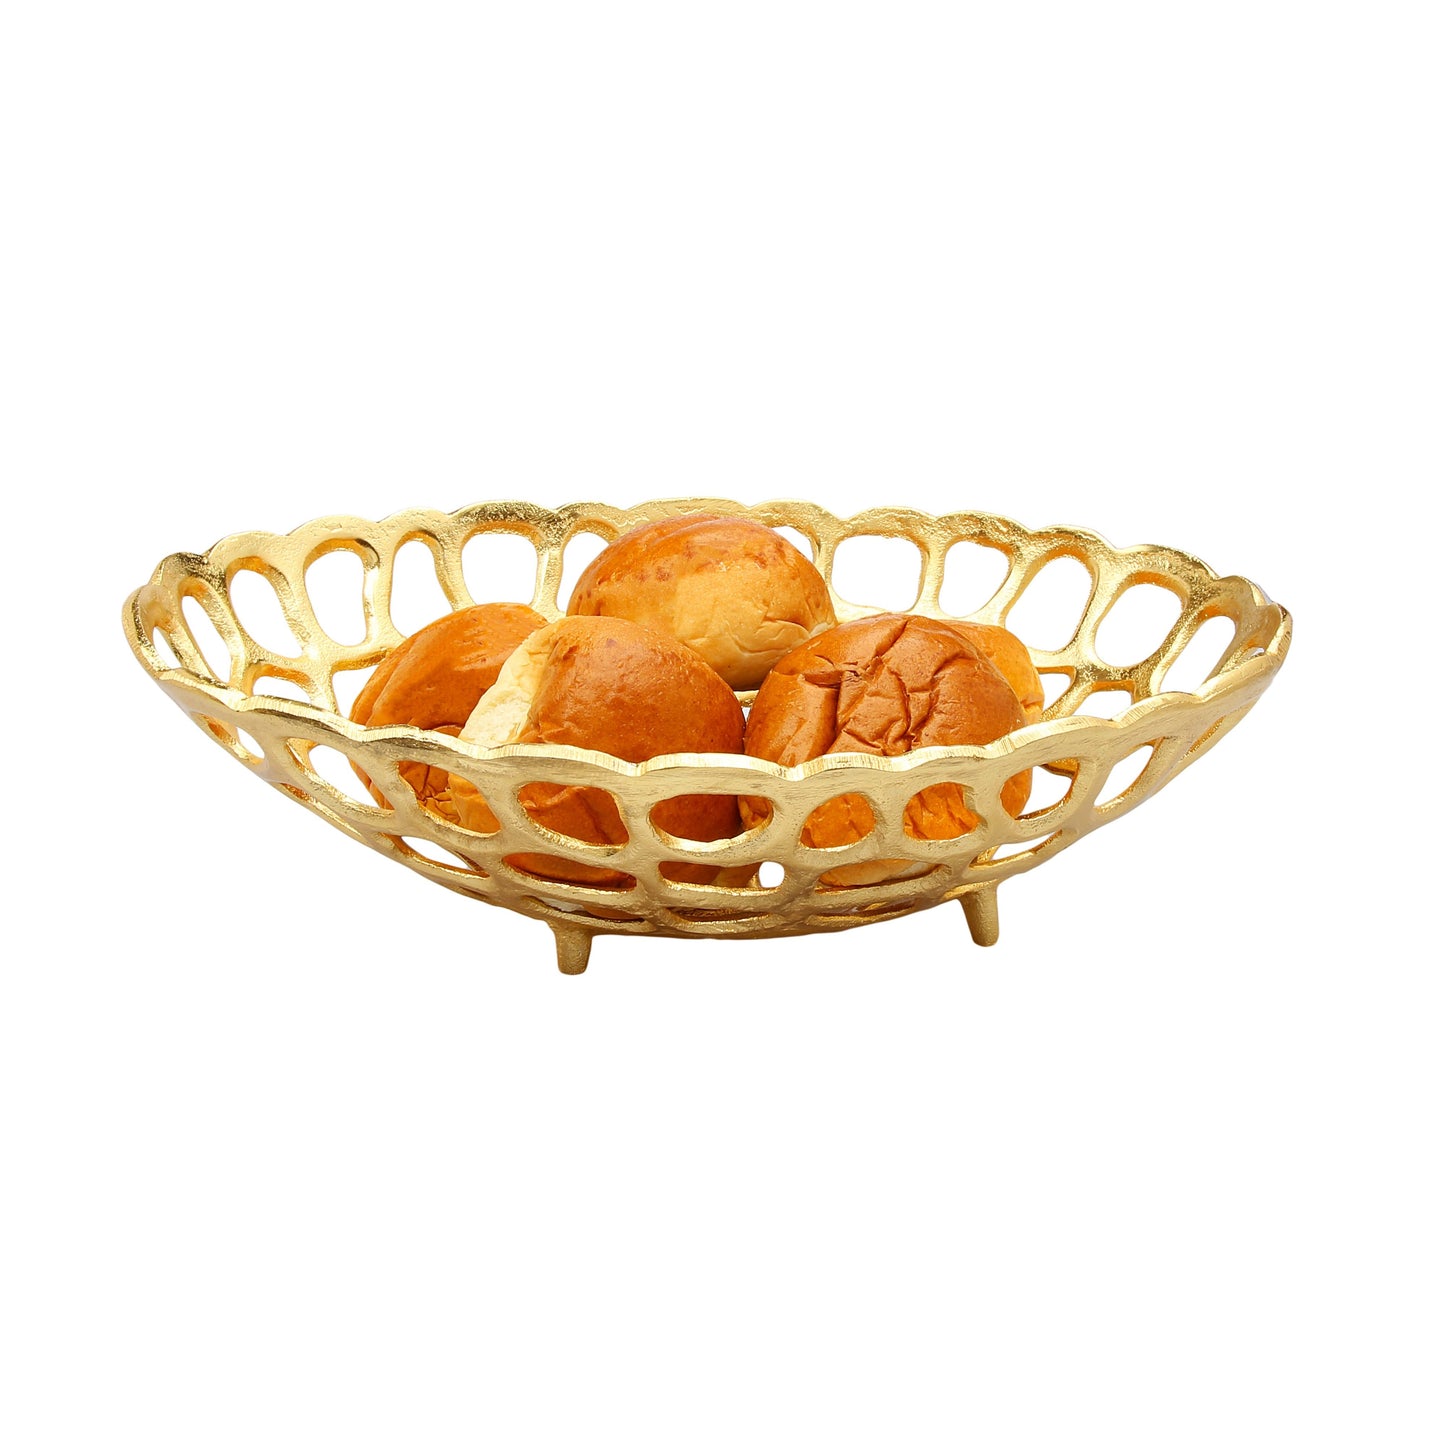 Classic Touch Decor 15.25" Oval Gold Looped Bread Basket